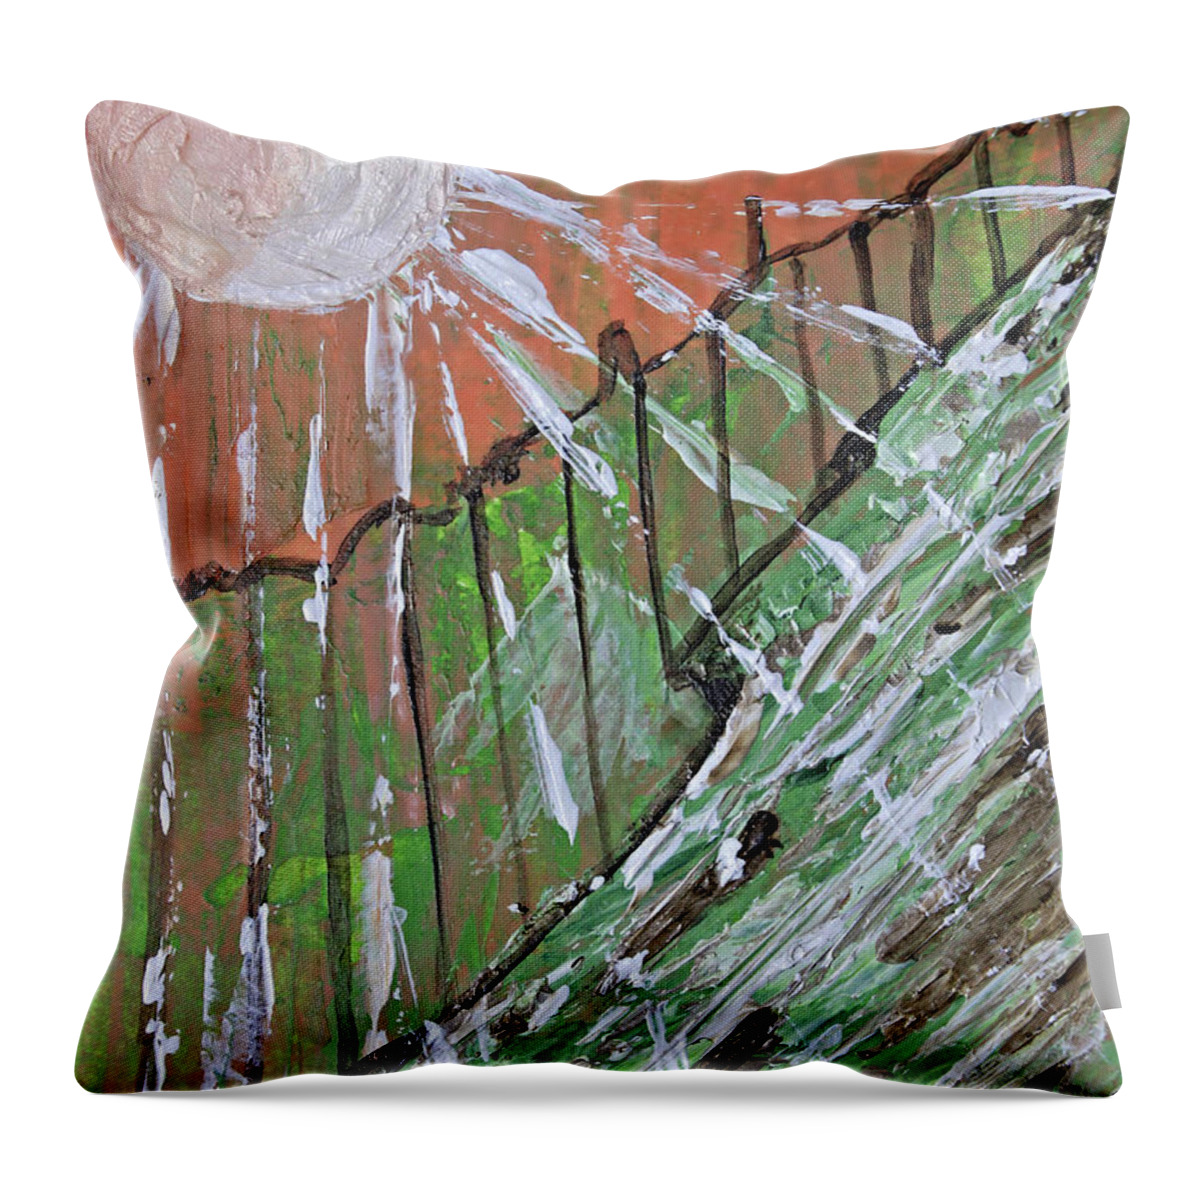 Peach Throw Pillow featuring the painting Peachy Day by April Burton